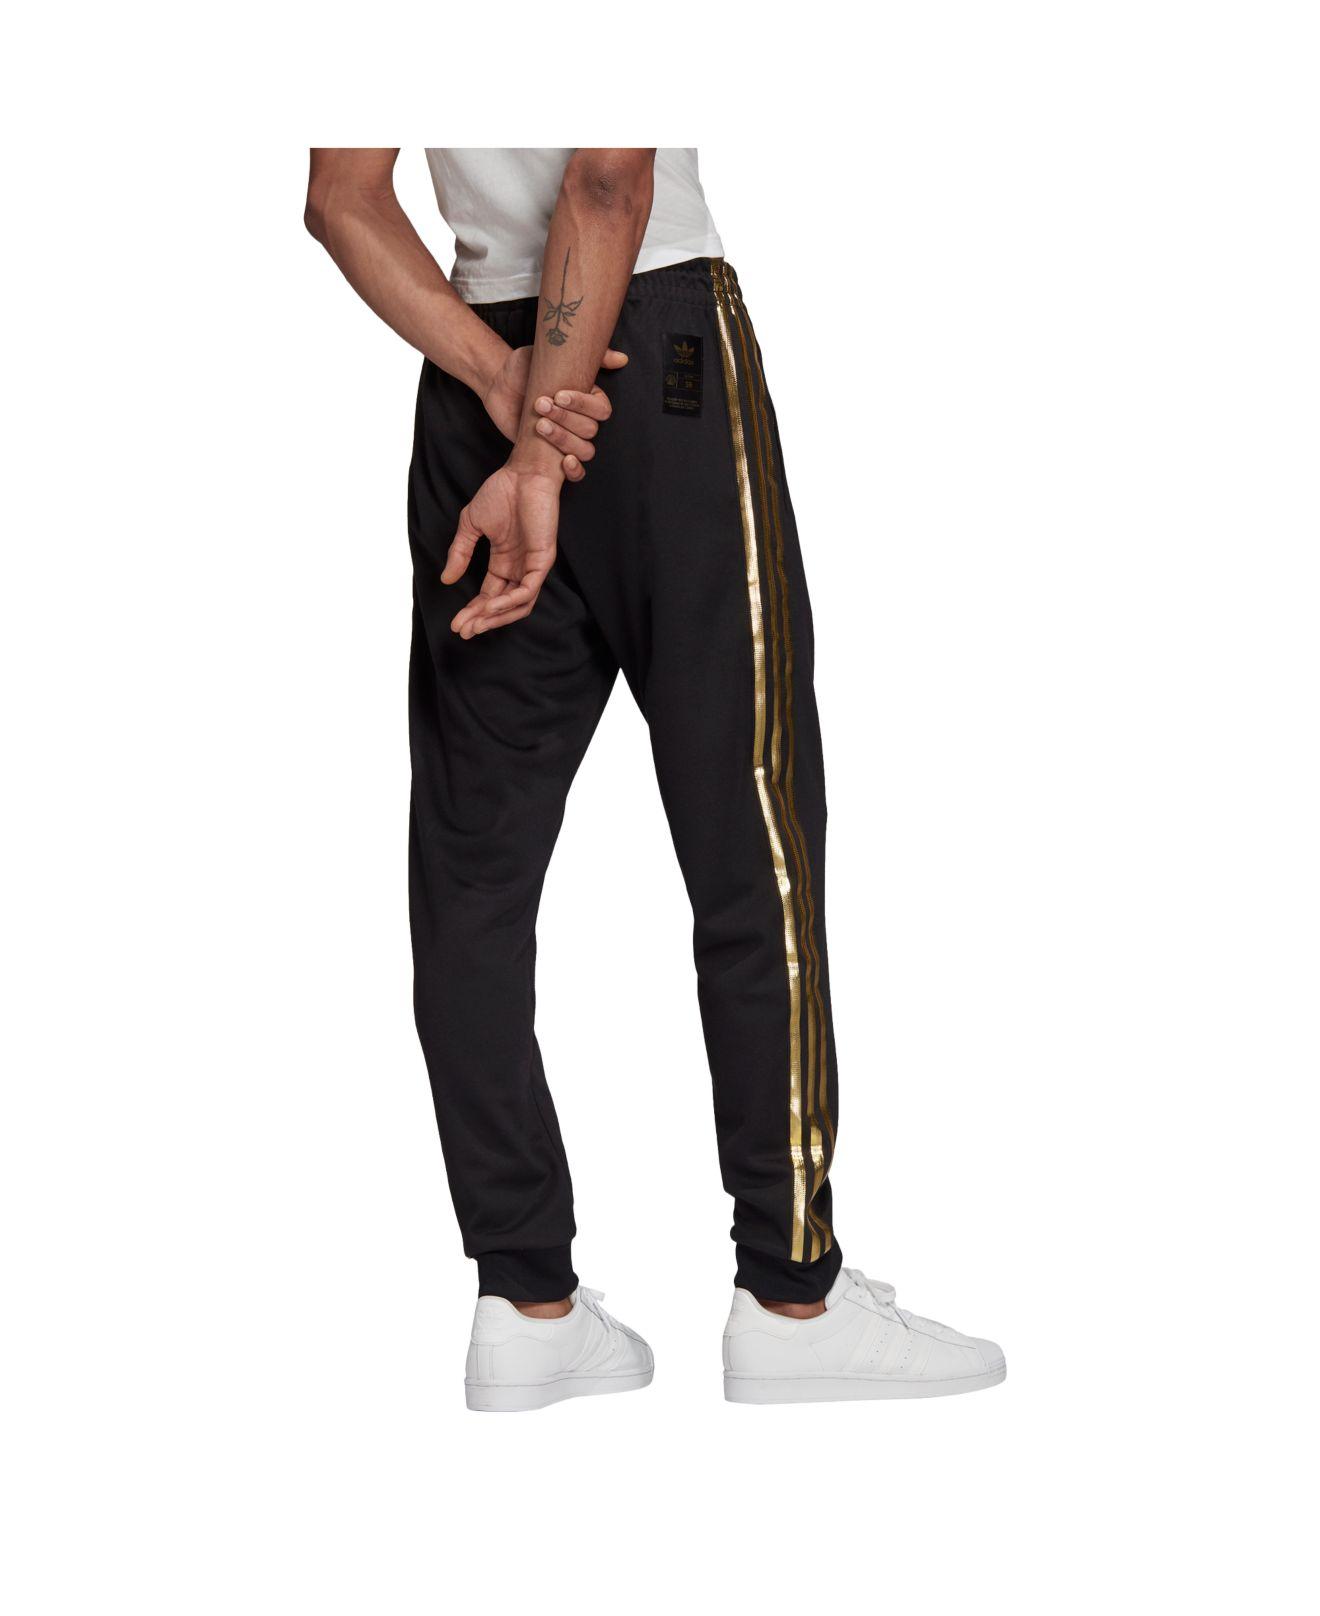 white and gold adidas joggers